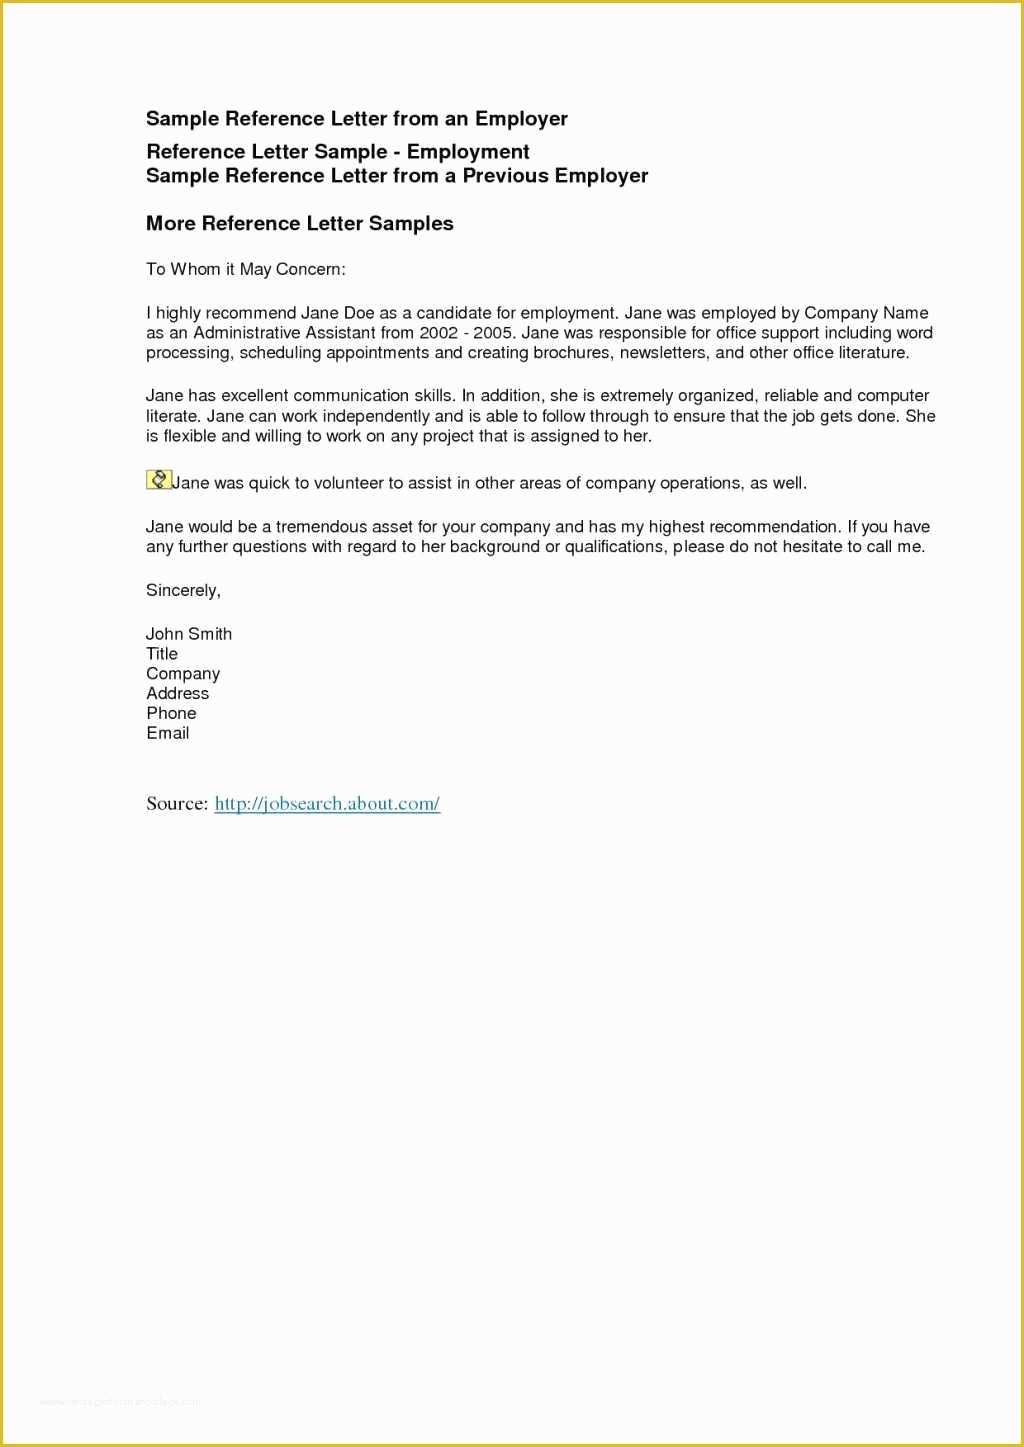 Personal Reference Letter Template Free Of Re Mendation Letter for A Friend Sample Free Immigration